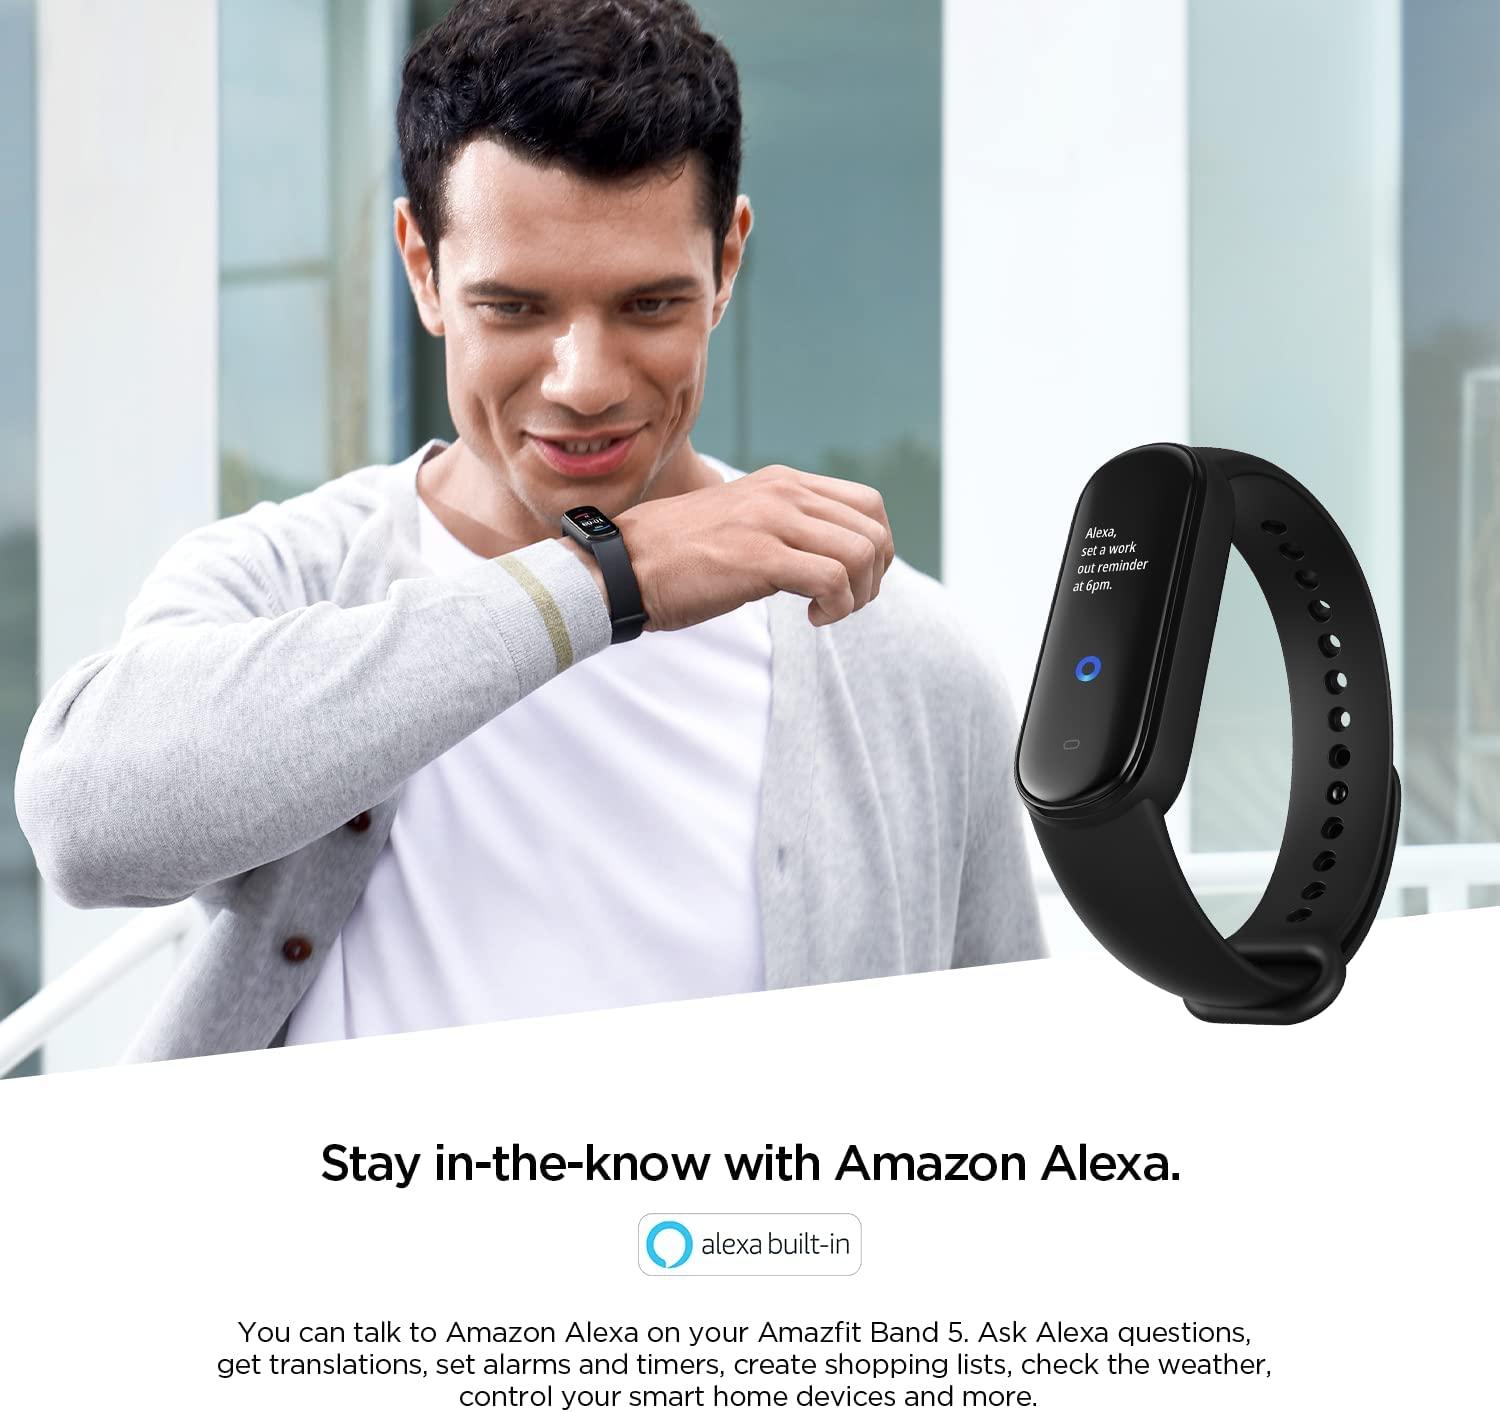  Certified Refurbished Amazfit Band 5 Activity Fitness Tracker  with Alexa Built-in, 15-Day Battery Life, Blood Oxygen, Heart Rate, Sleep &  Stress Monitoring, 5 ATM Water Resistant, Black : Sports & Outdoors